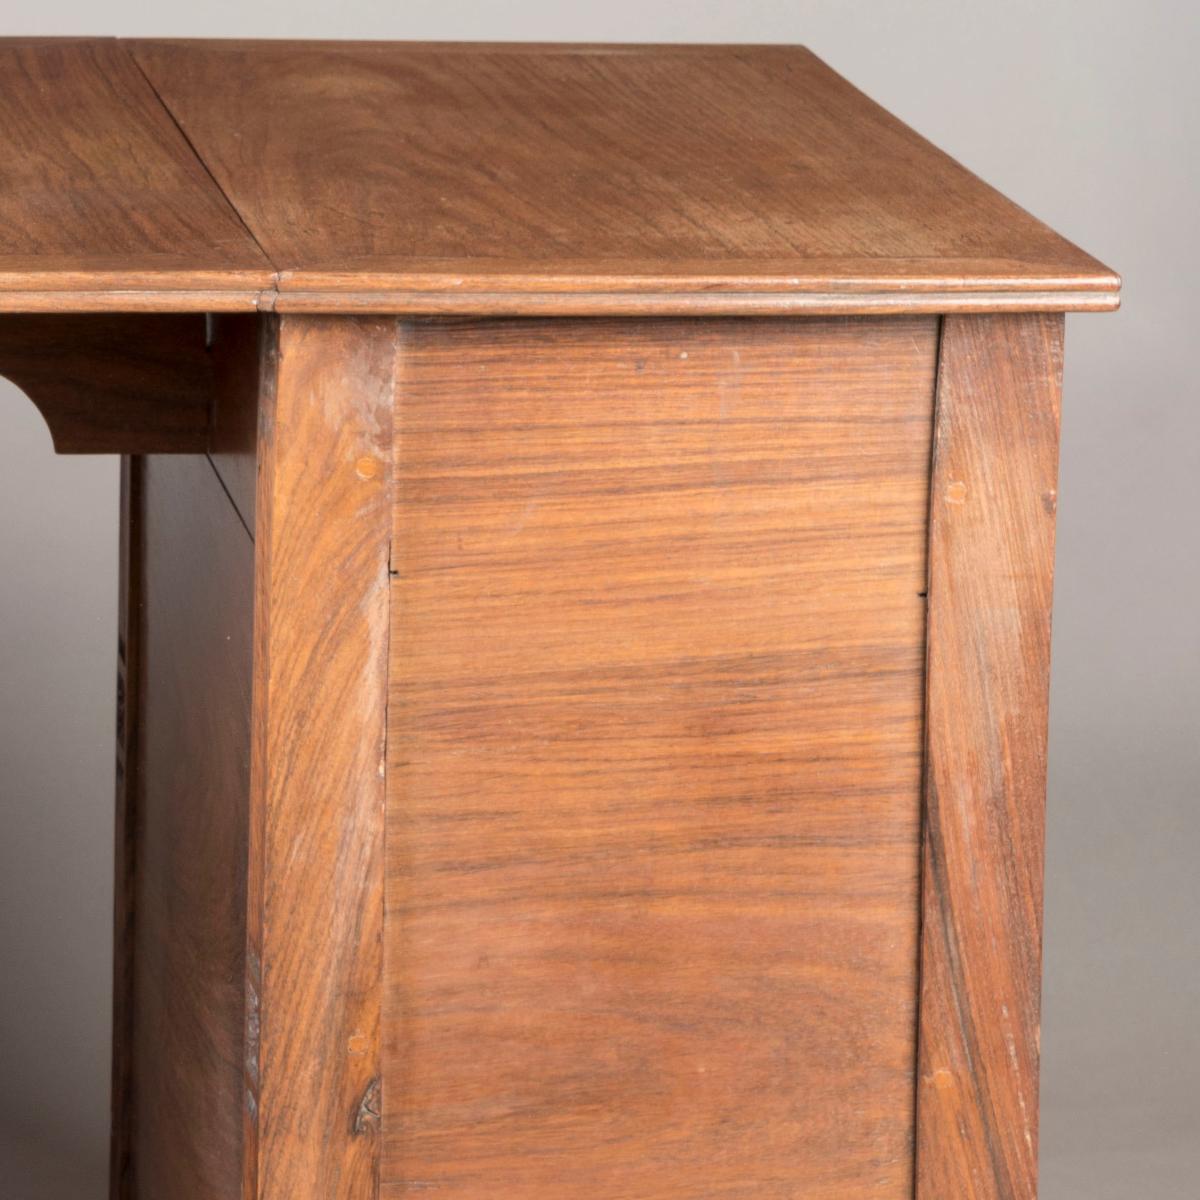 An Ingenious ‘Collapsible’ Campaign Pedestal Desk